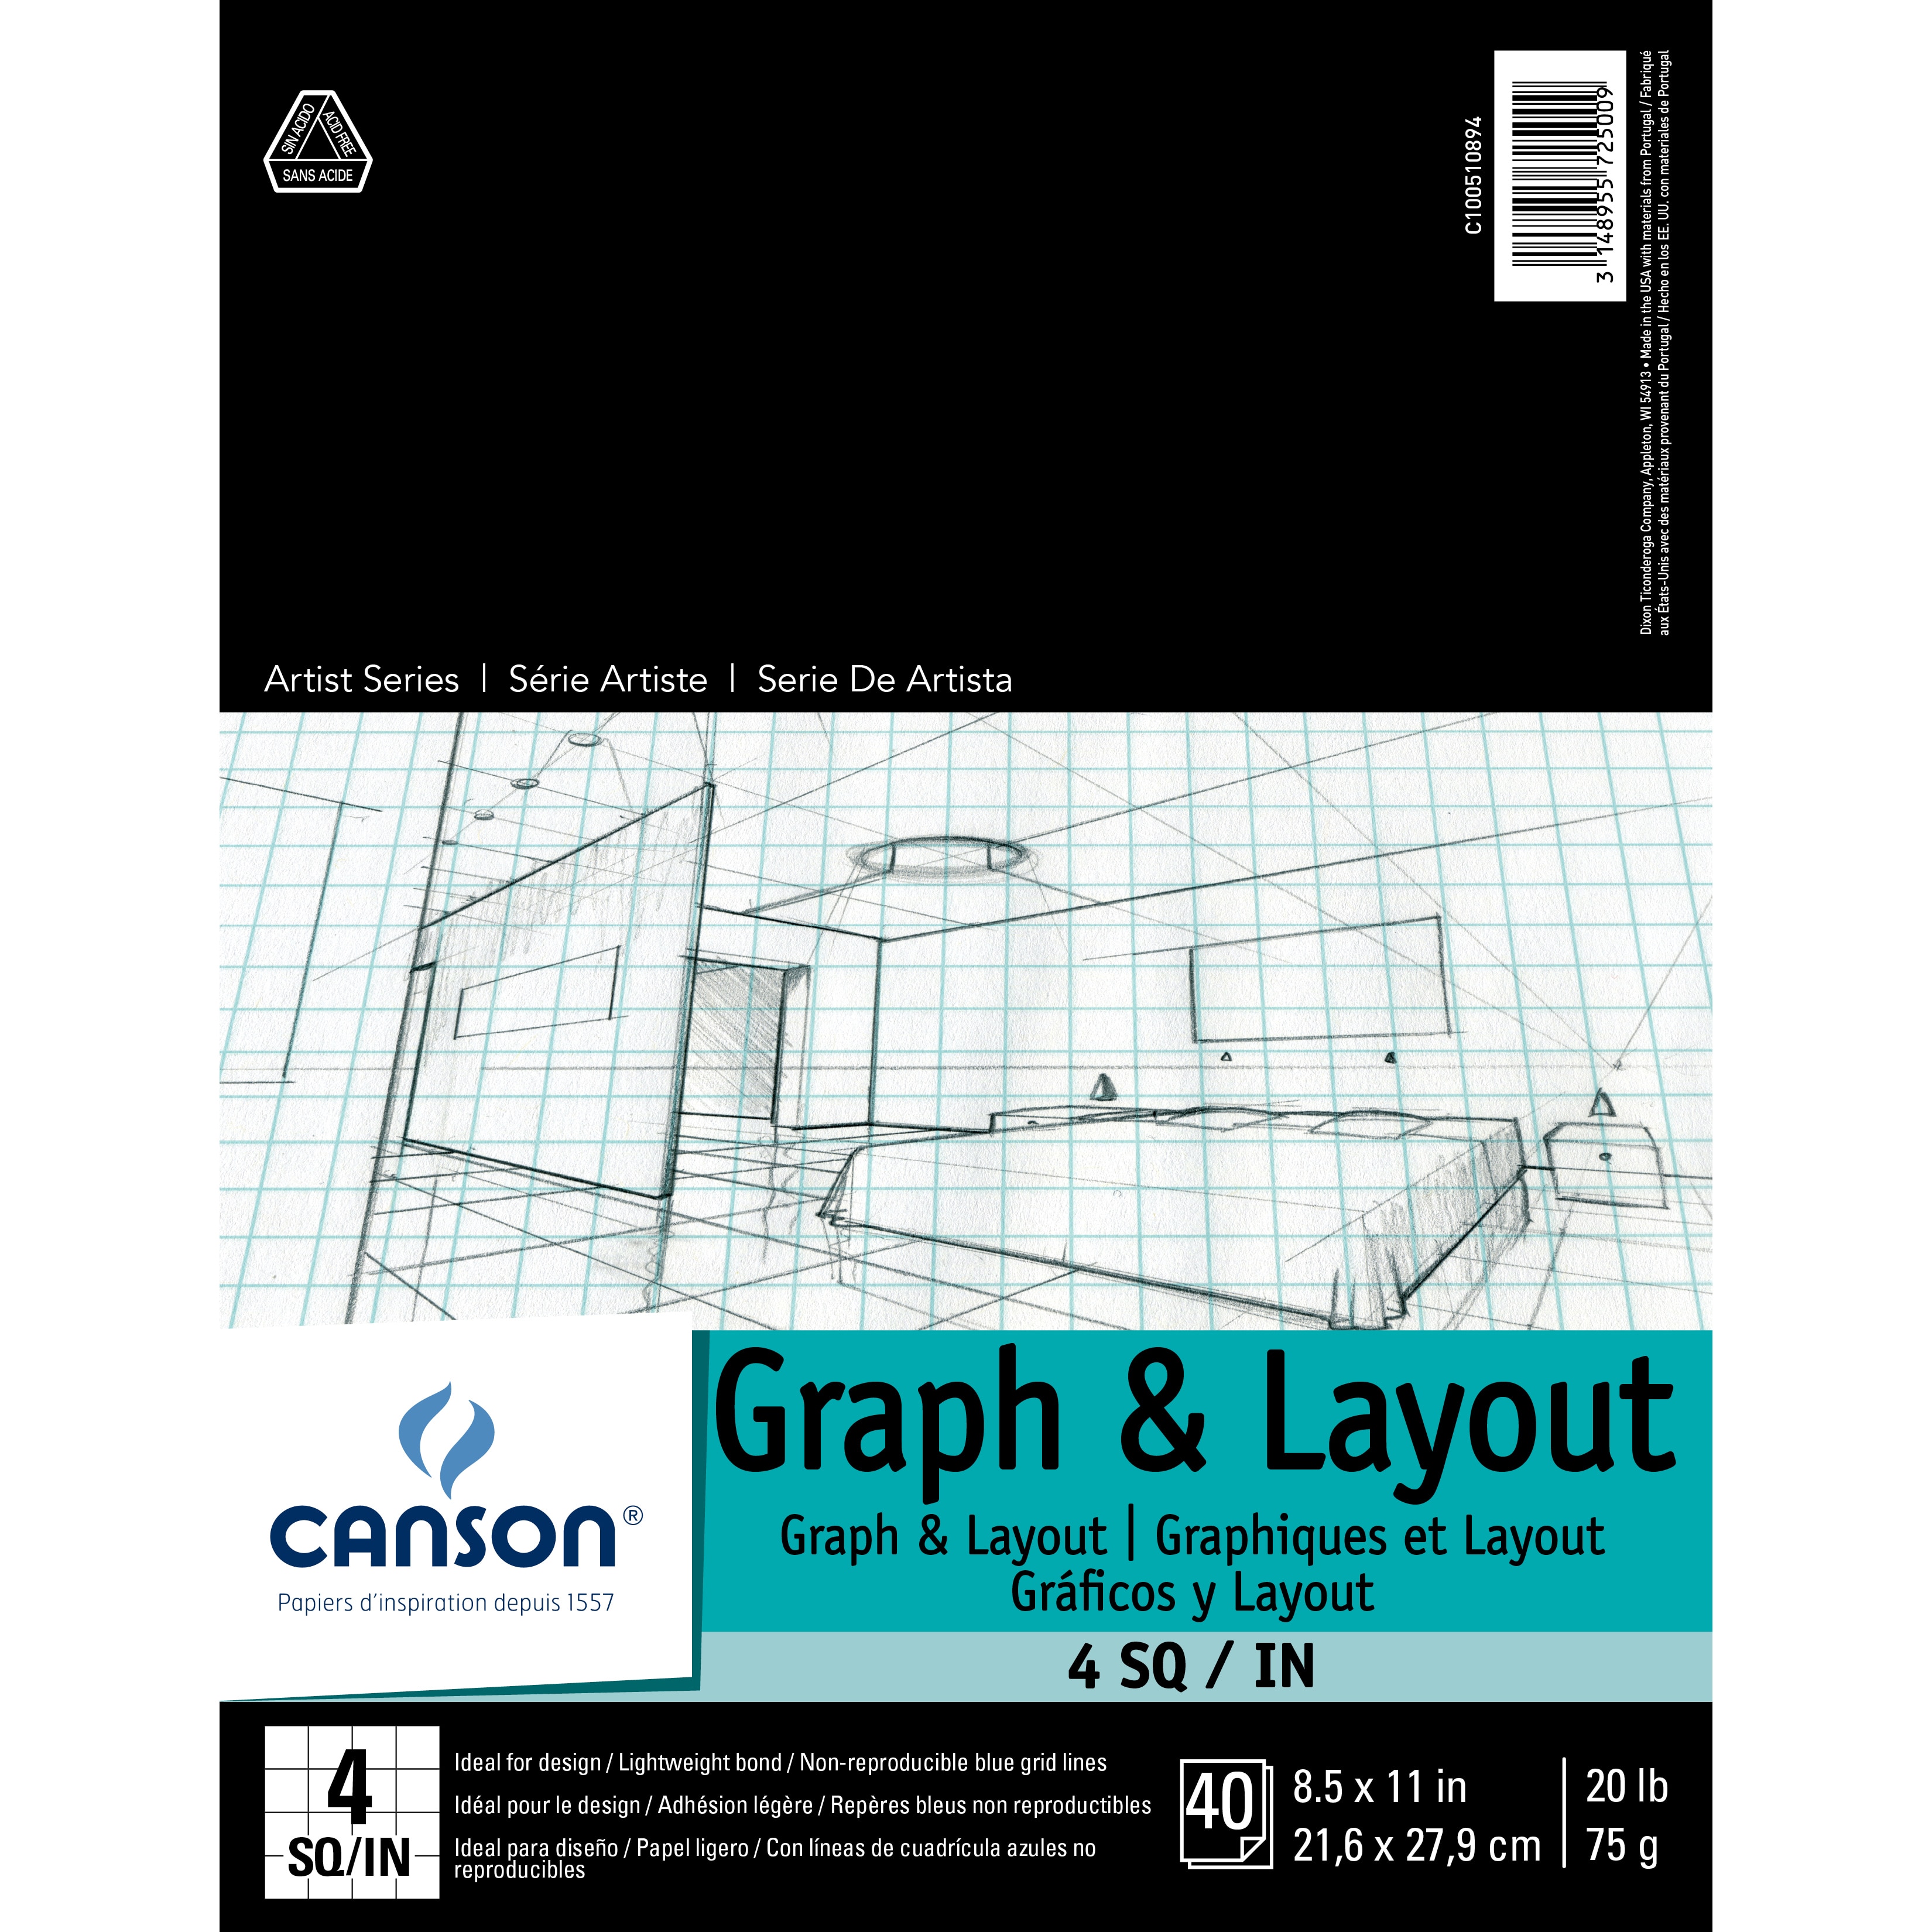 Canson Artist Series Graph & Layout Paper Pad, 40 Sheets, 4" x 4" Grid, 8.5" x 11"